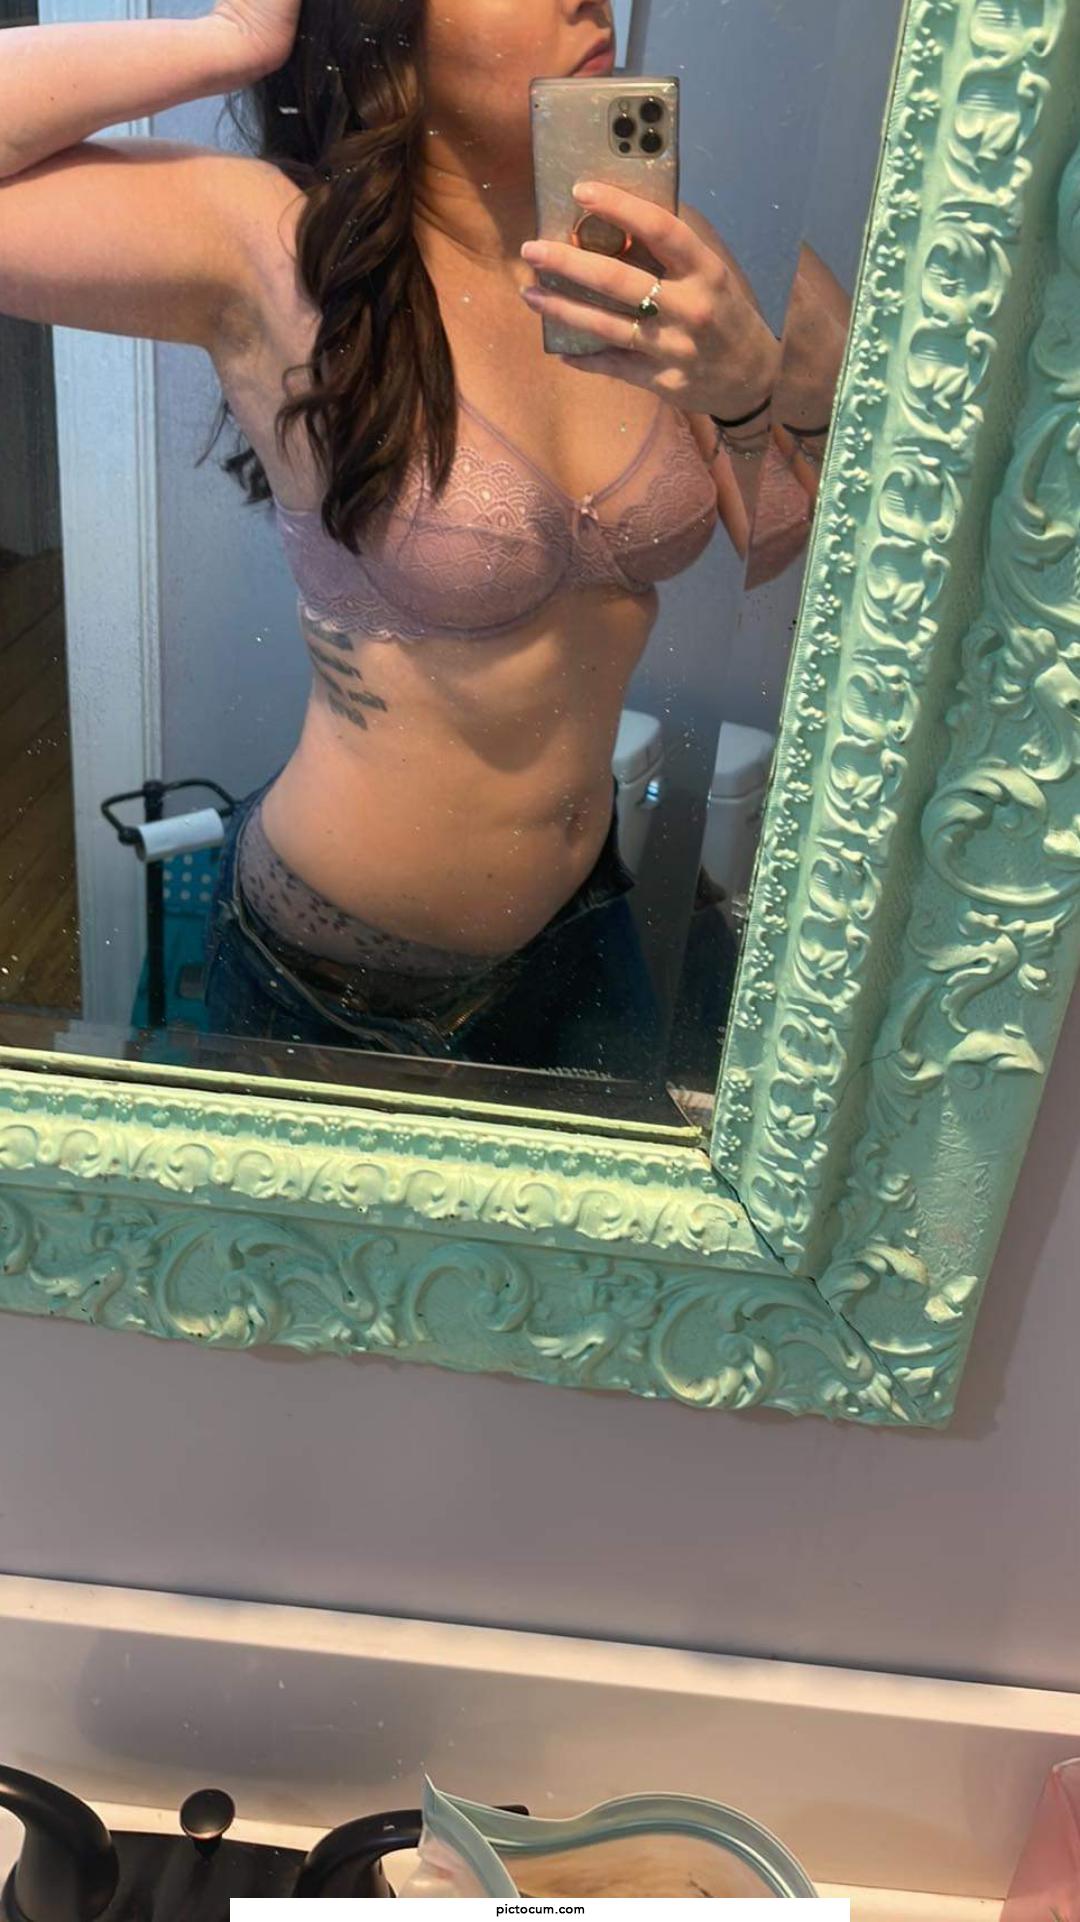 Do you like my new bra? will you remove it for me? 34-year-old